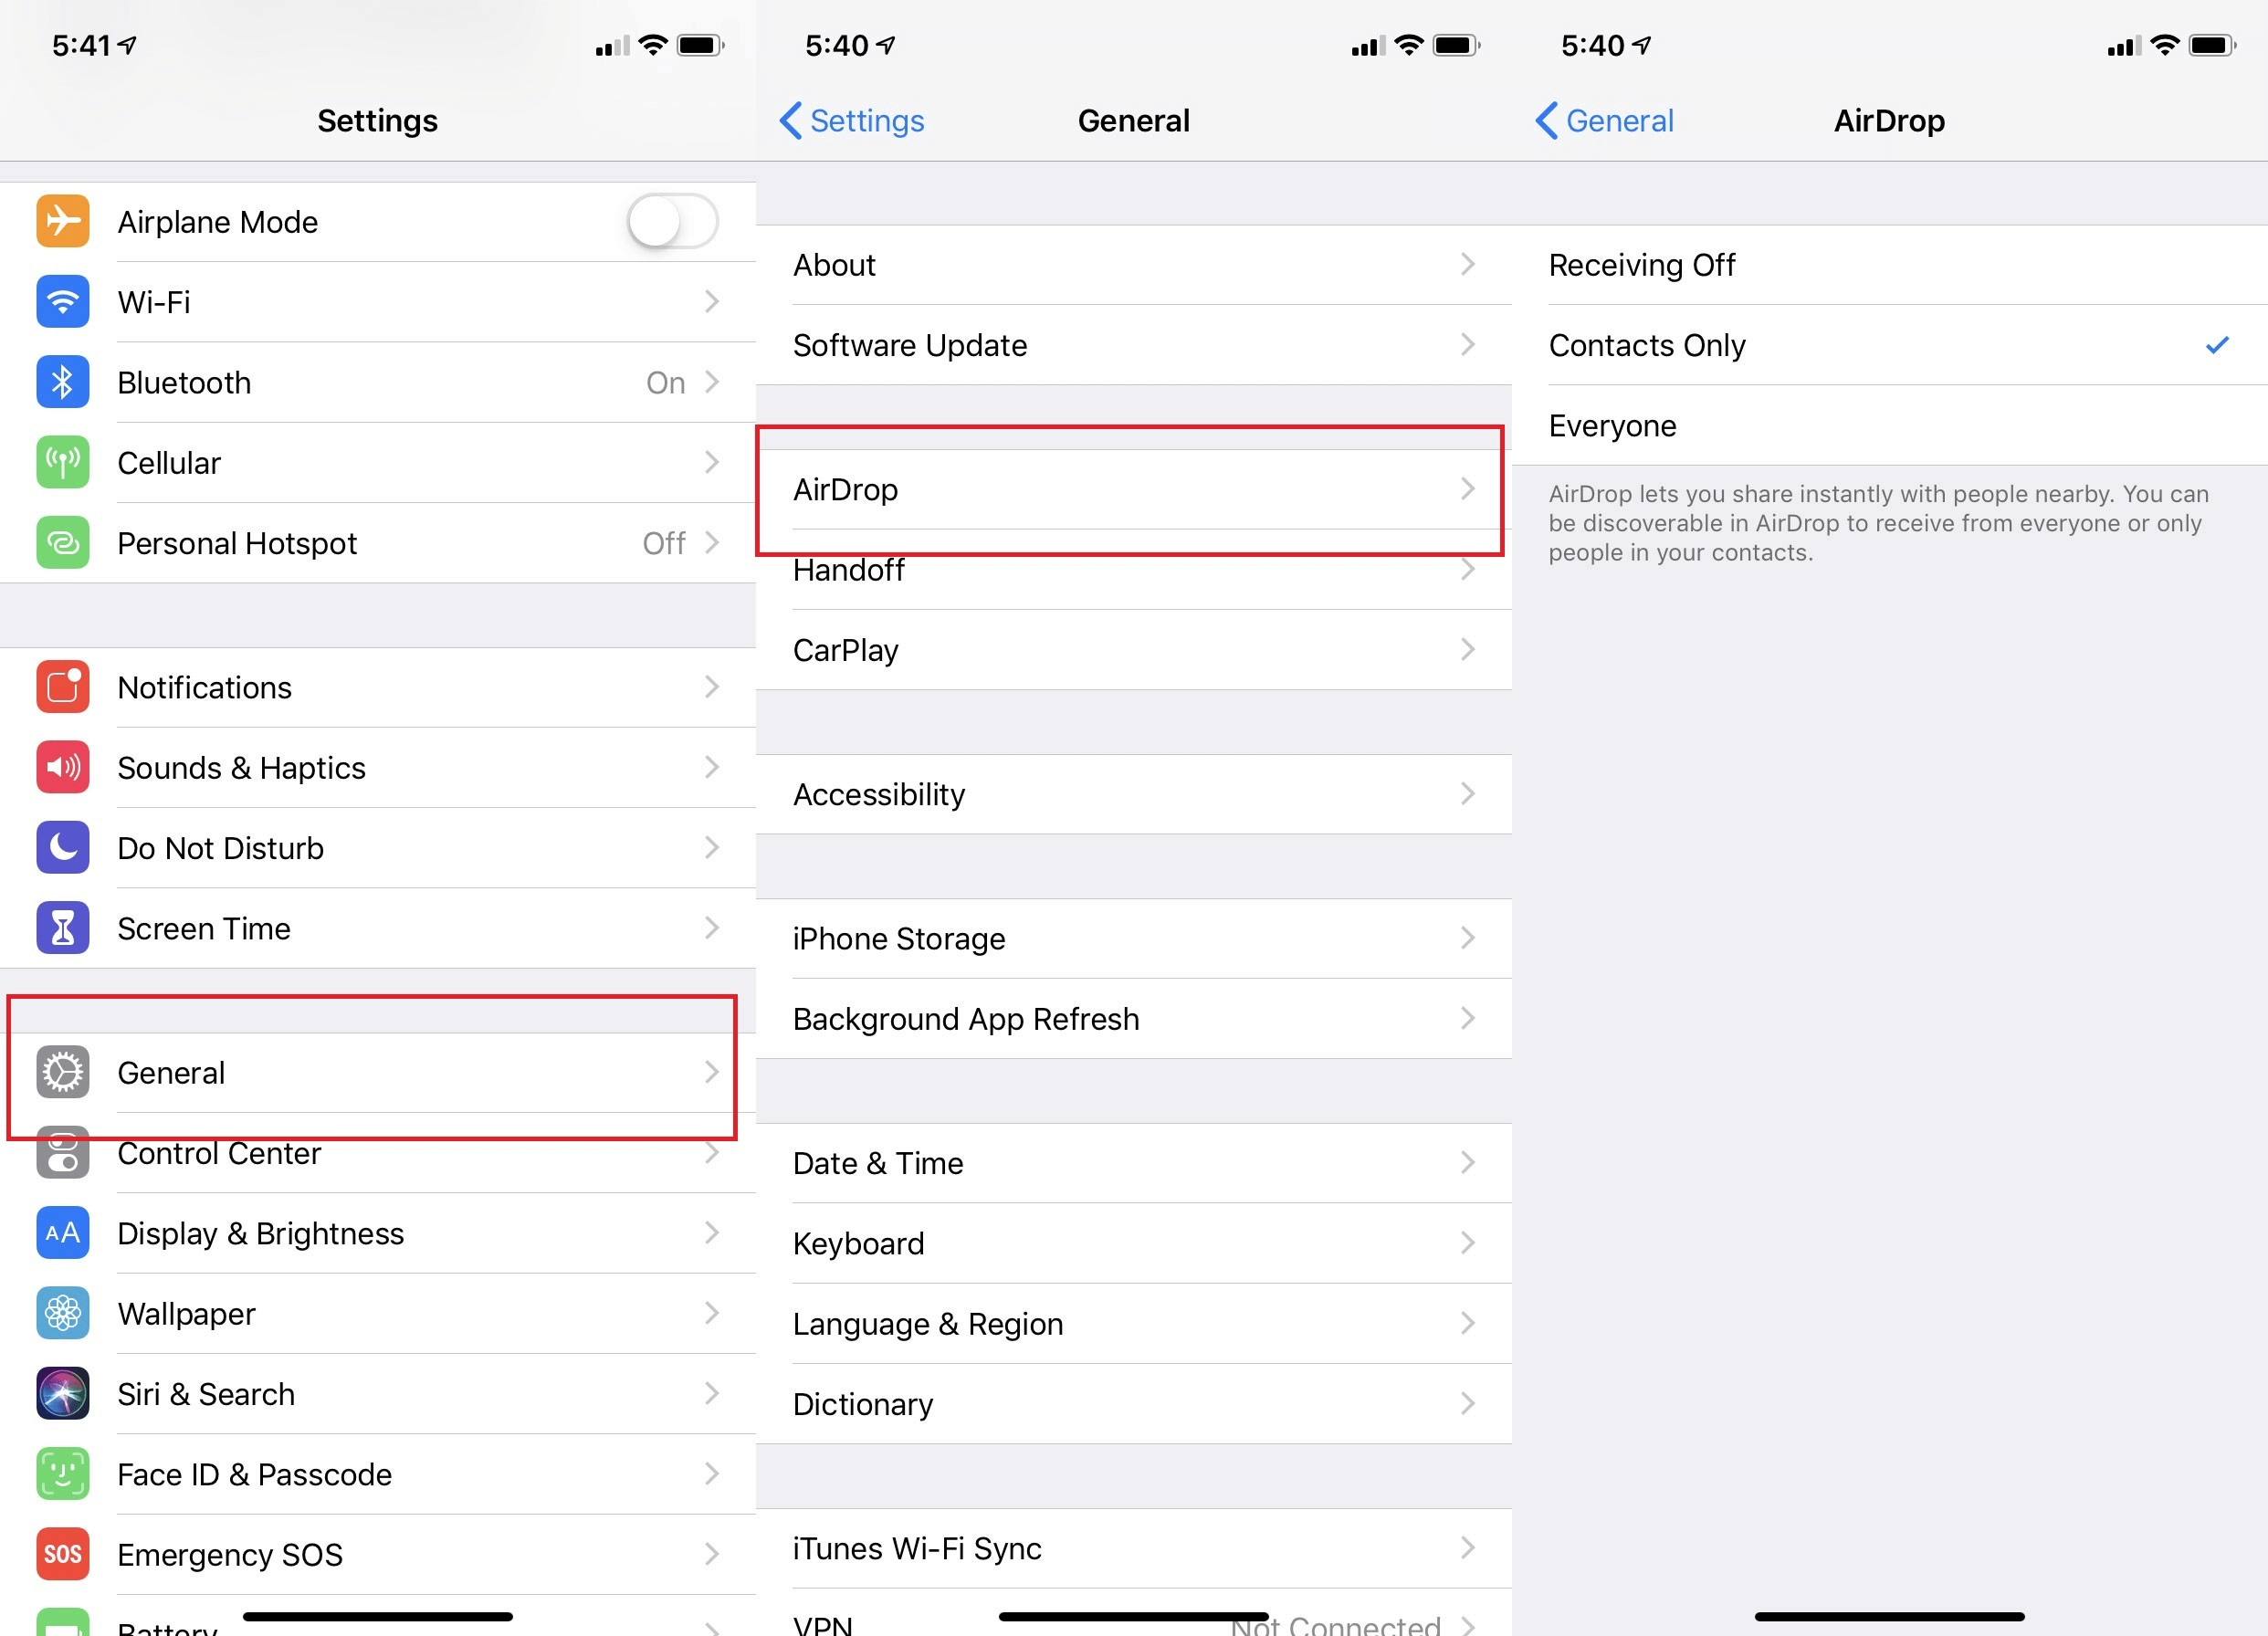 turn on airdrop from settings